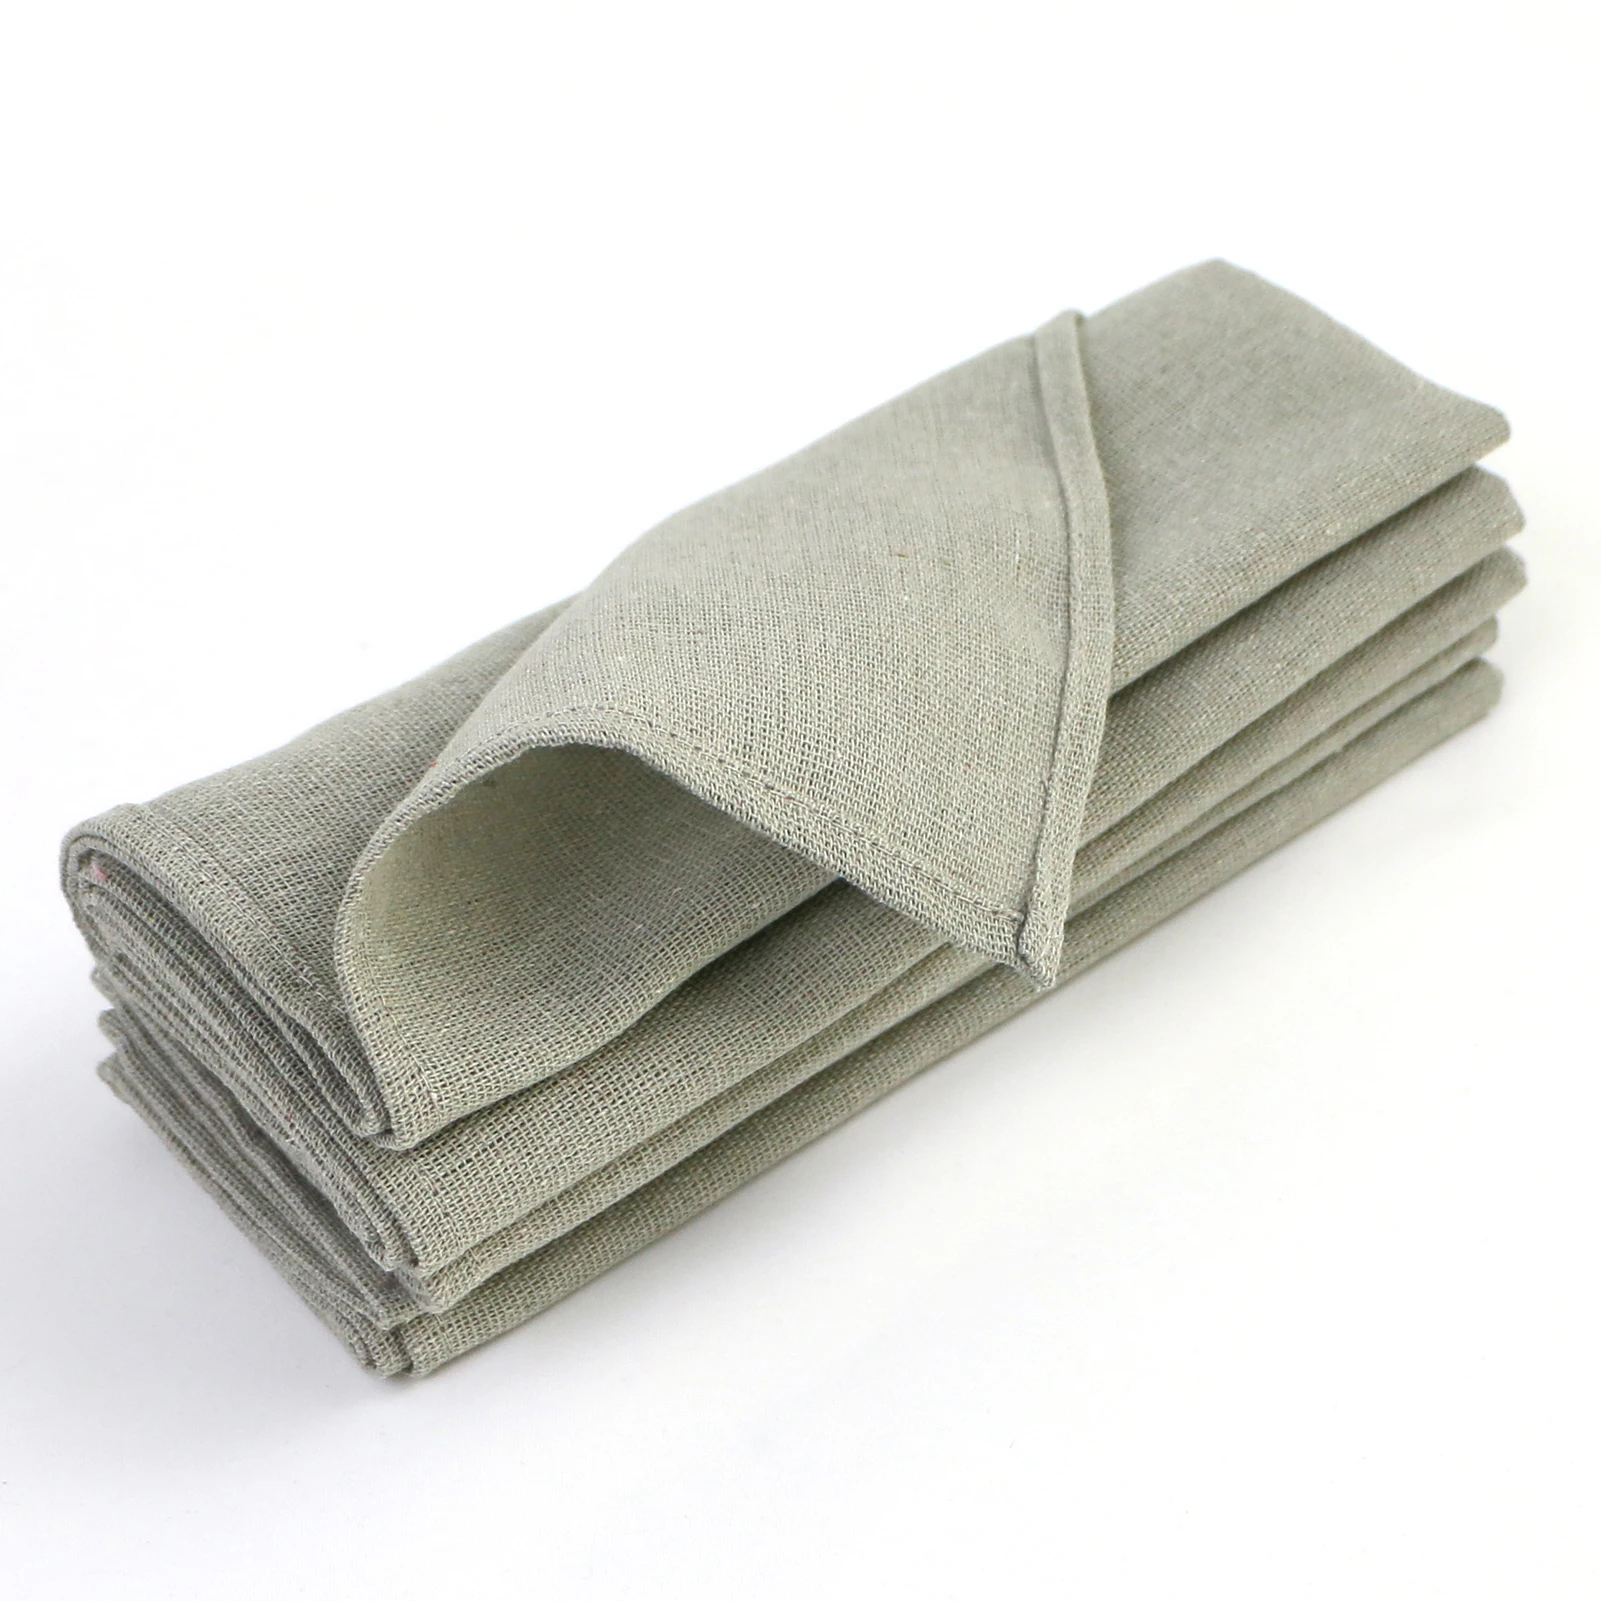 https://ae01.alicdn.com/kf/H1dd8b4a7b6634ad4ba69396f55b8efabr/Dinner-Napkins-Cotton-Blend-Fabric-Set-of-8-Pack-45x45cm-Comfortable-Durable-Home-Table-Mat-for.jpg